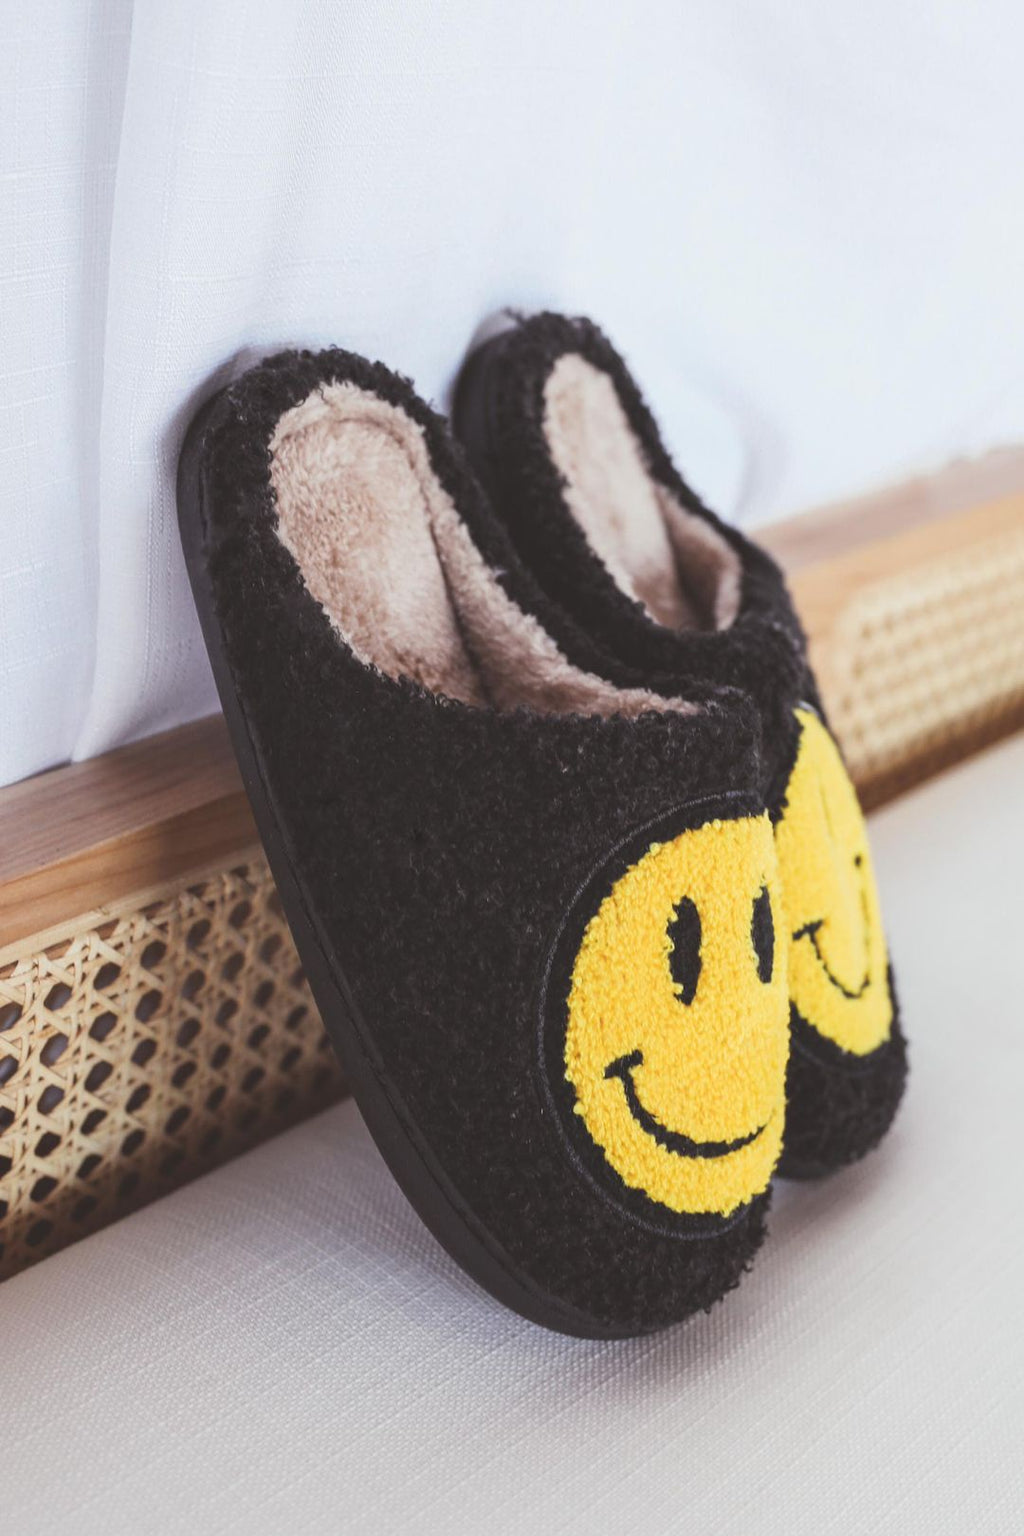 Black Smiley Face Slippers